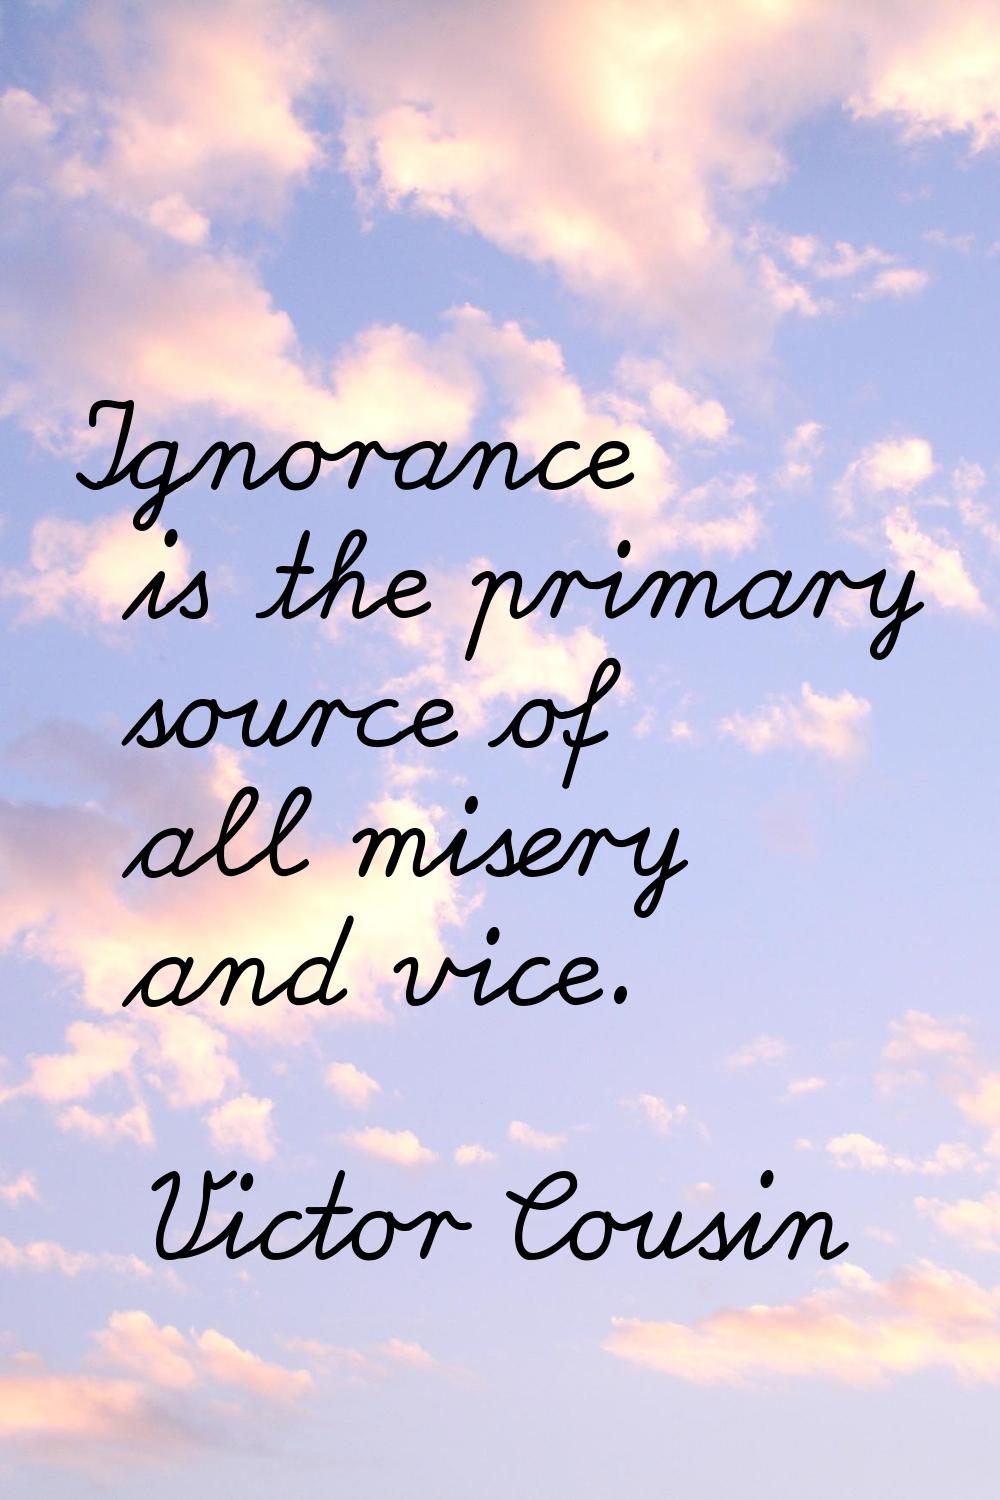 Ignorance is the primary source of all misery and vice.